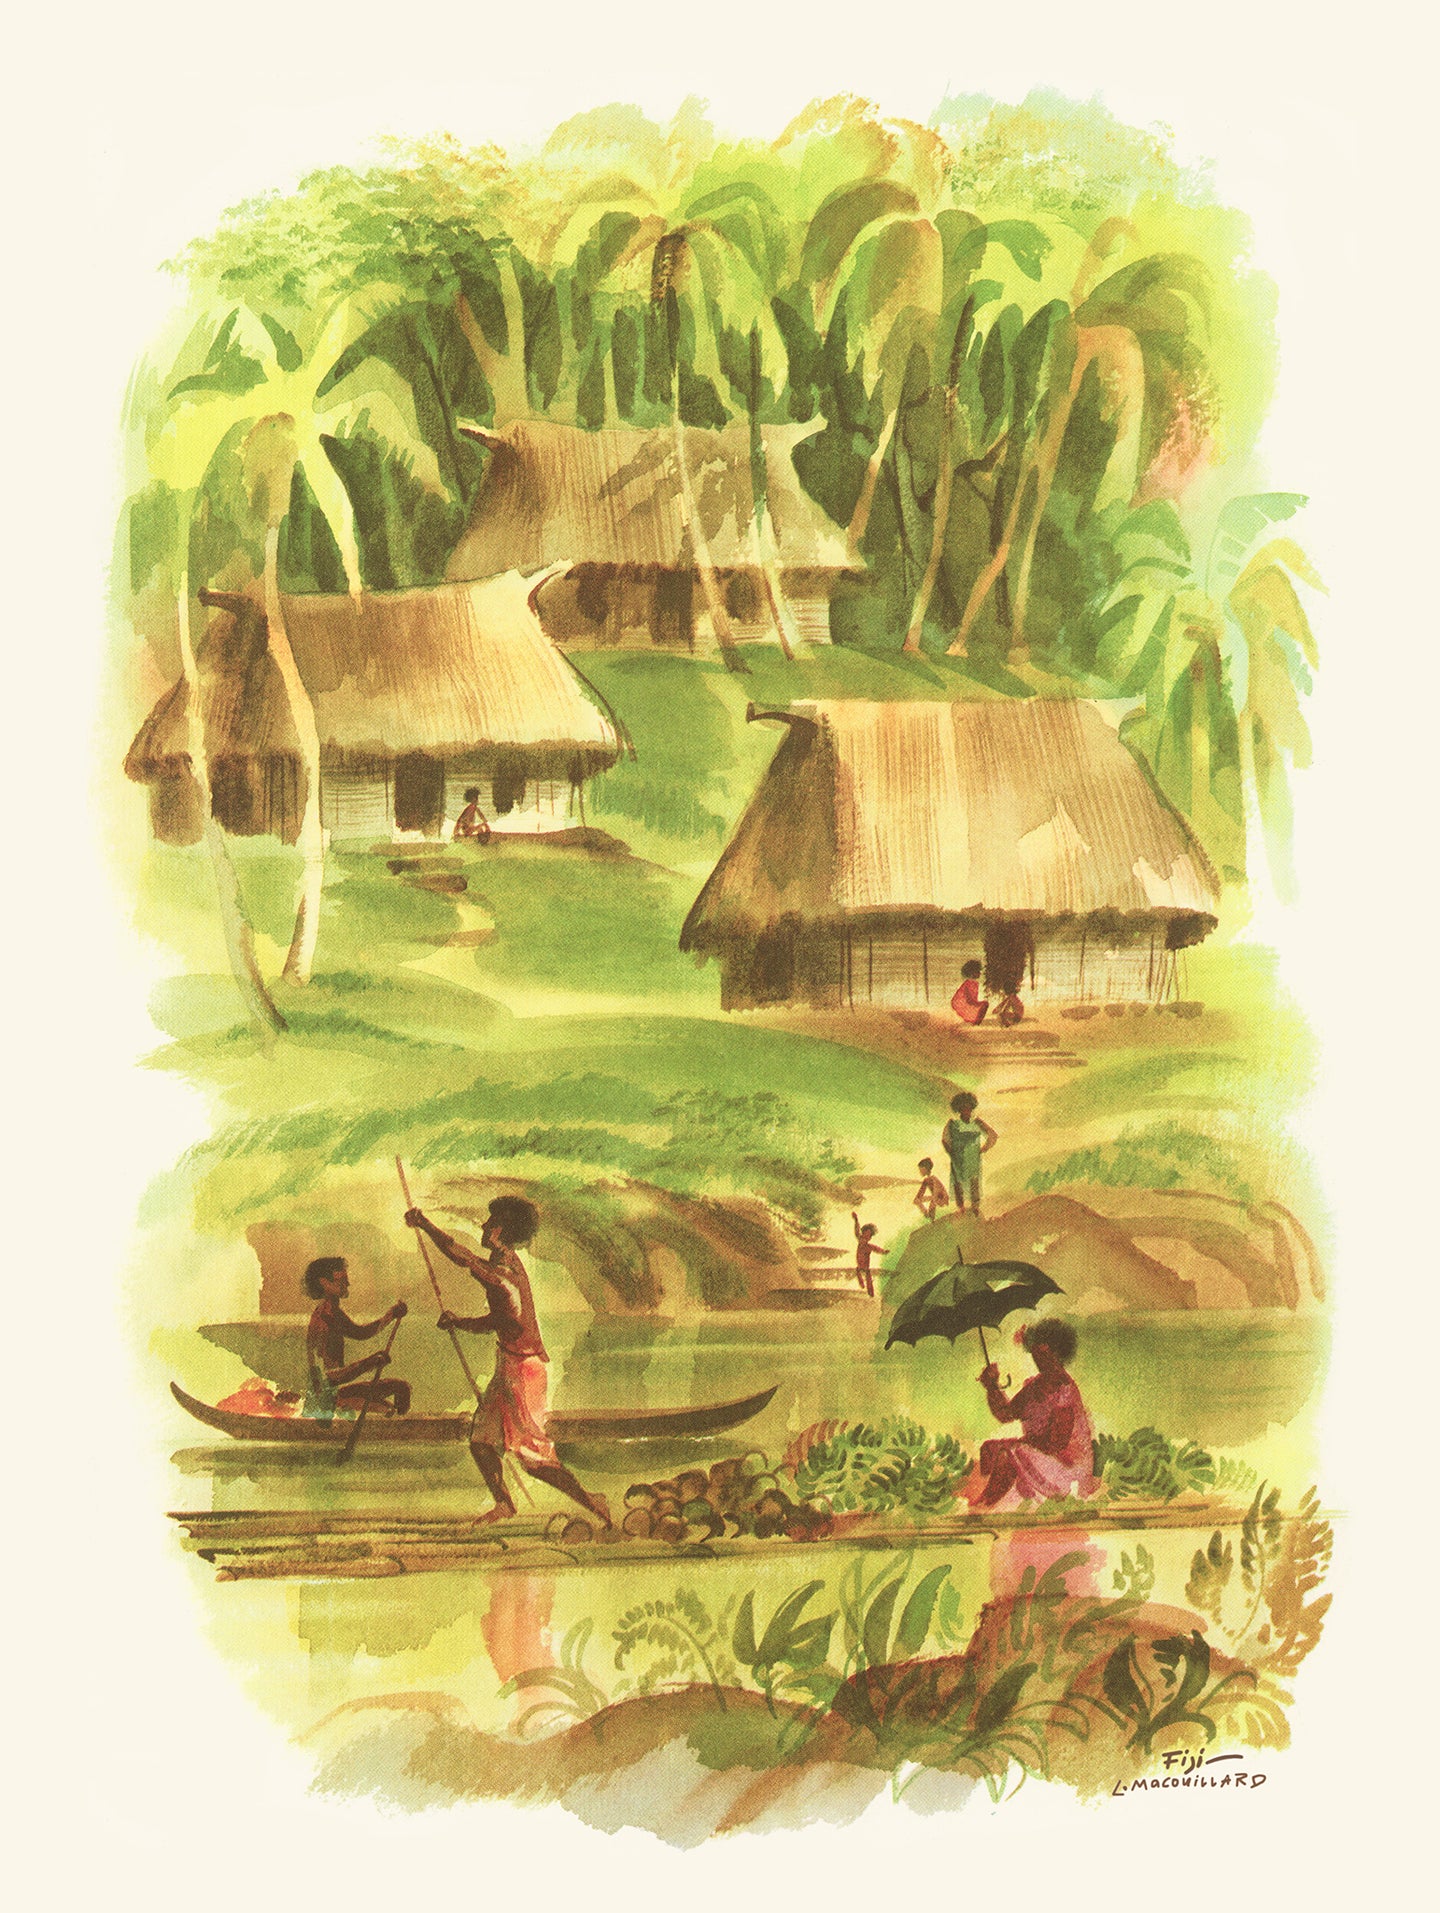 Watercolor scene of an island village with three grass-roof huts set among tropical trees. A woman in red holds an umbrella over herself as a boy rows her raft on the water while another man in a rowboat passes them.